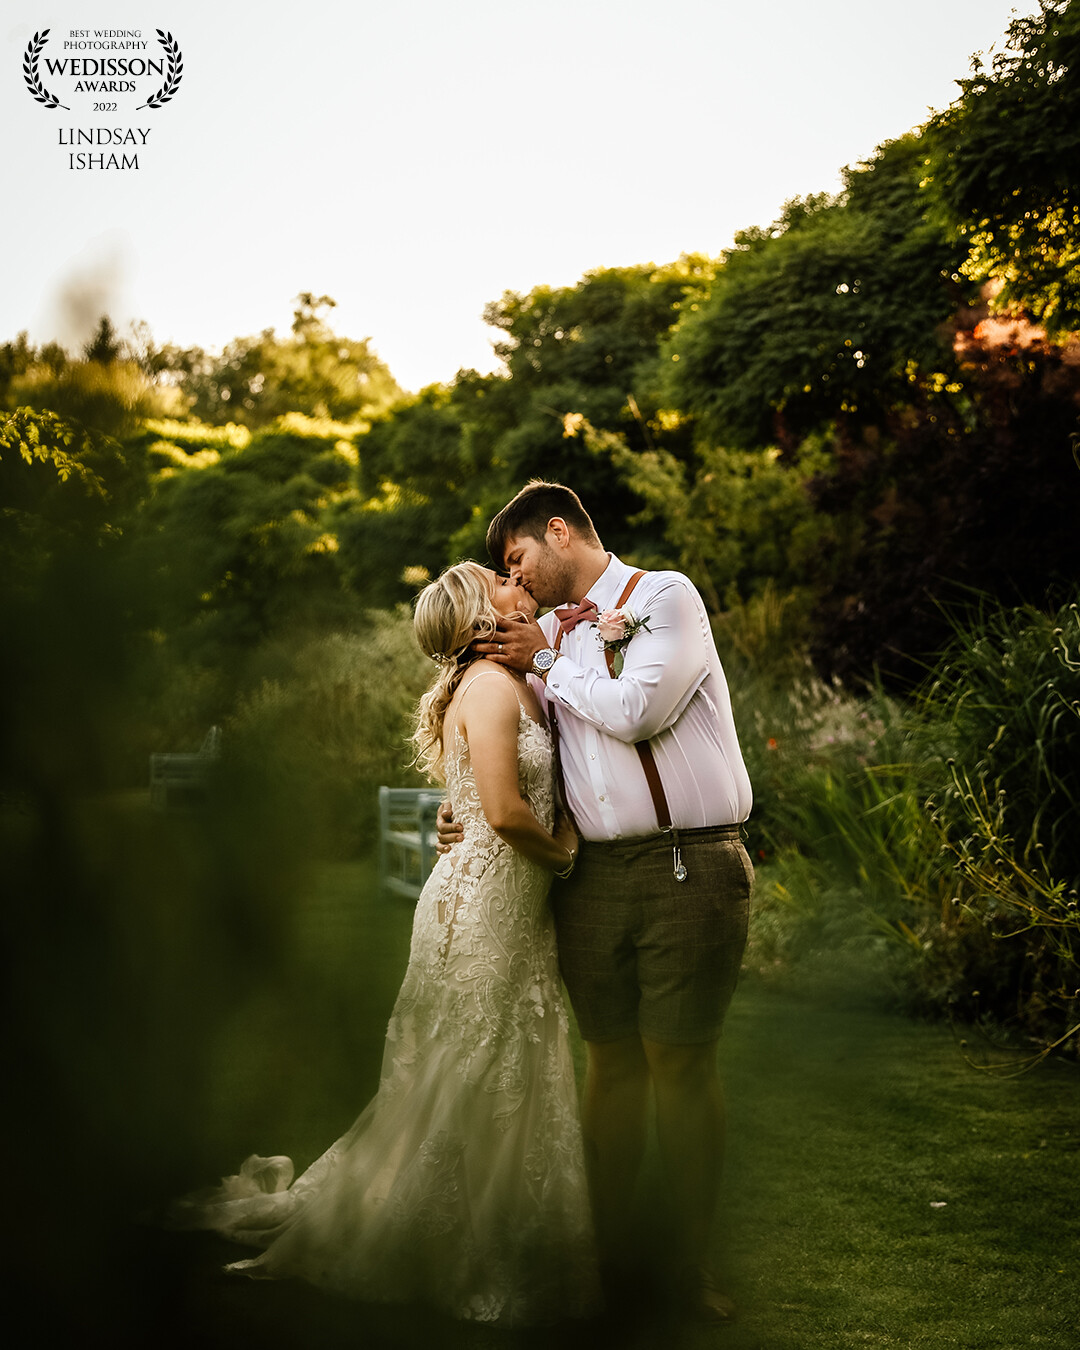 Hannah & Ollie's day was captured at the stunningly beautiful Elsham Hall in North Lincolnshire.  Taken during golden hour, this two were taking a romantic walk within the grounds and then shared a beautiful kiss - a priceless moment on their wedding day.